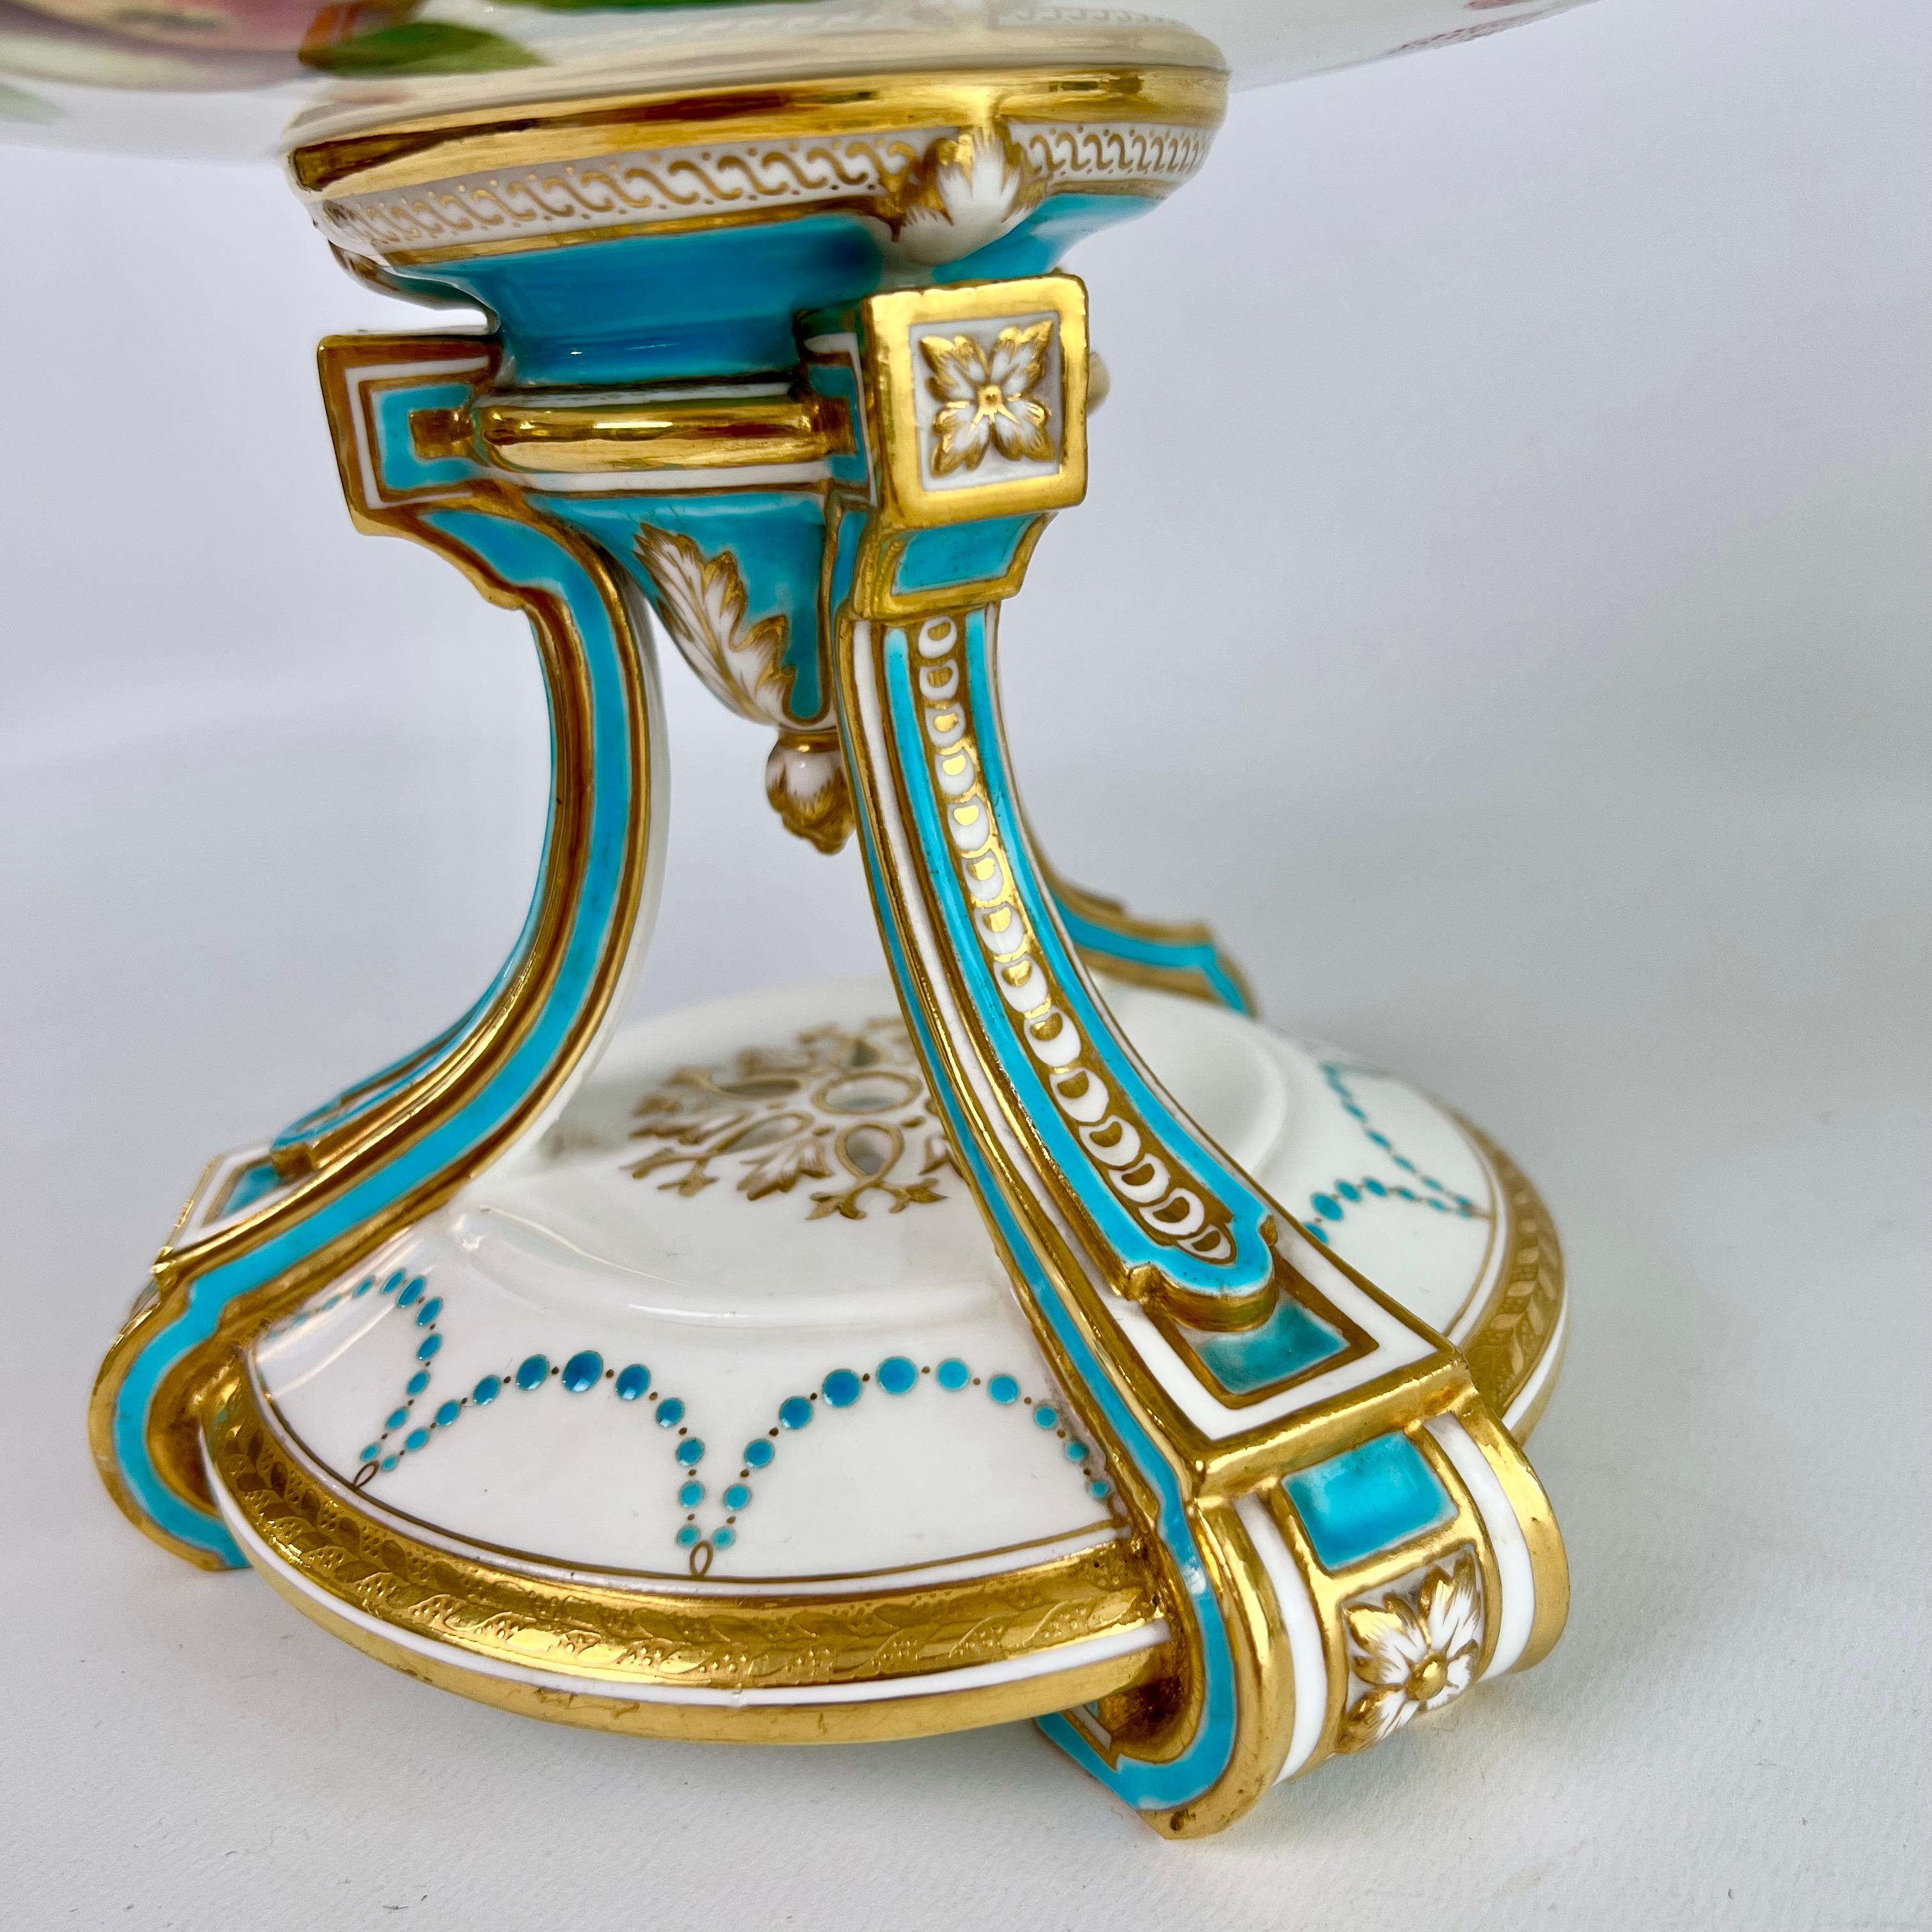 Hand-Painted Minton Porcelain Dessert Service, Turquoise and Gilt, Flowers and Fruits, 1870